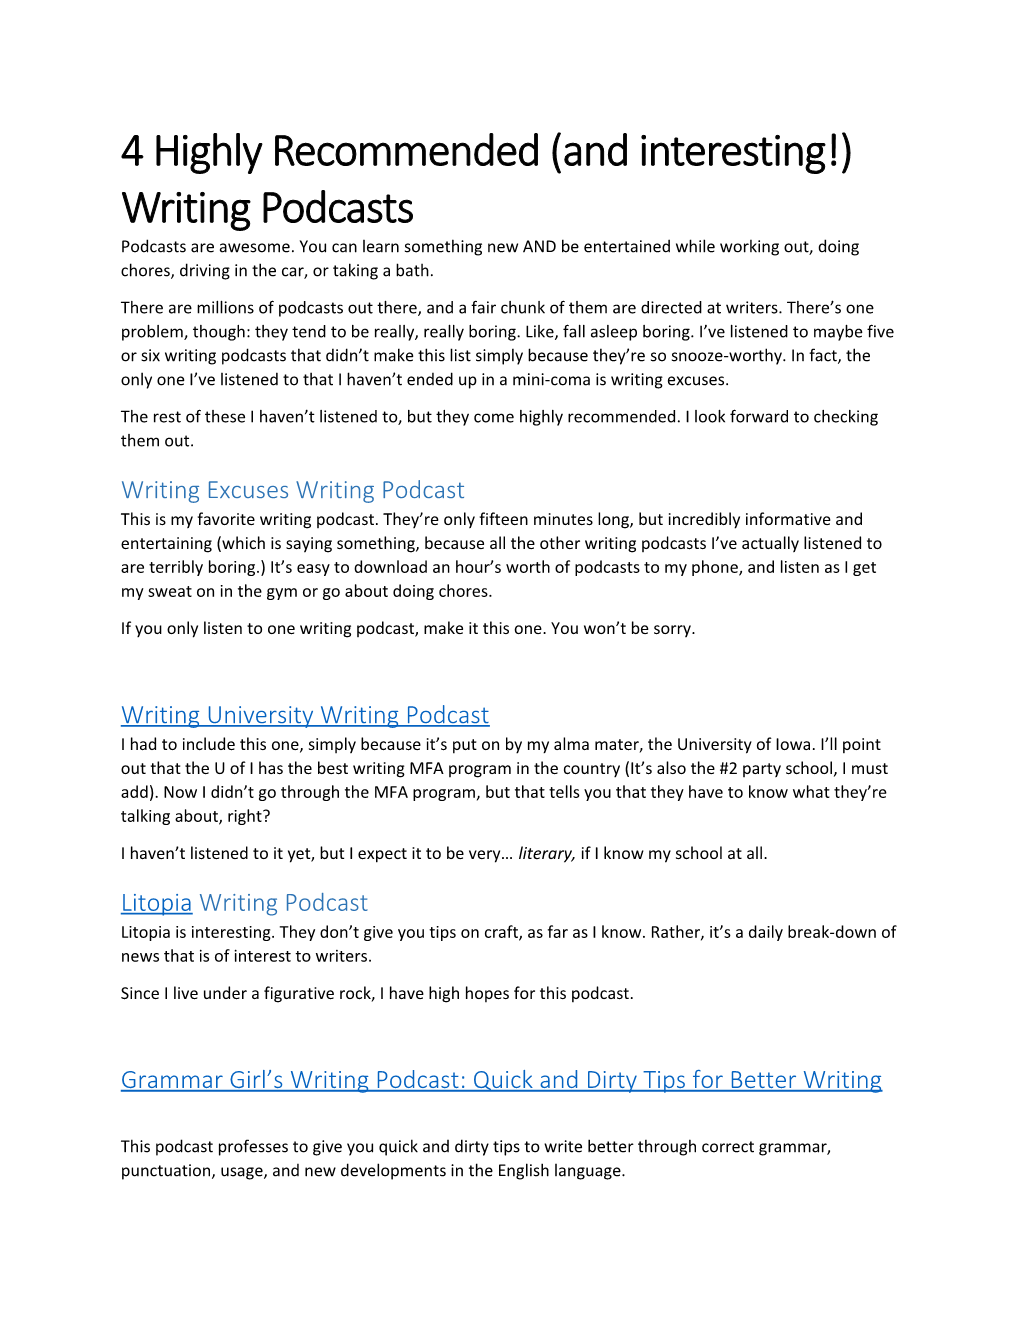 4 Highly Recommended (And Interesting!) Writing Podcasts